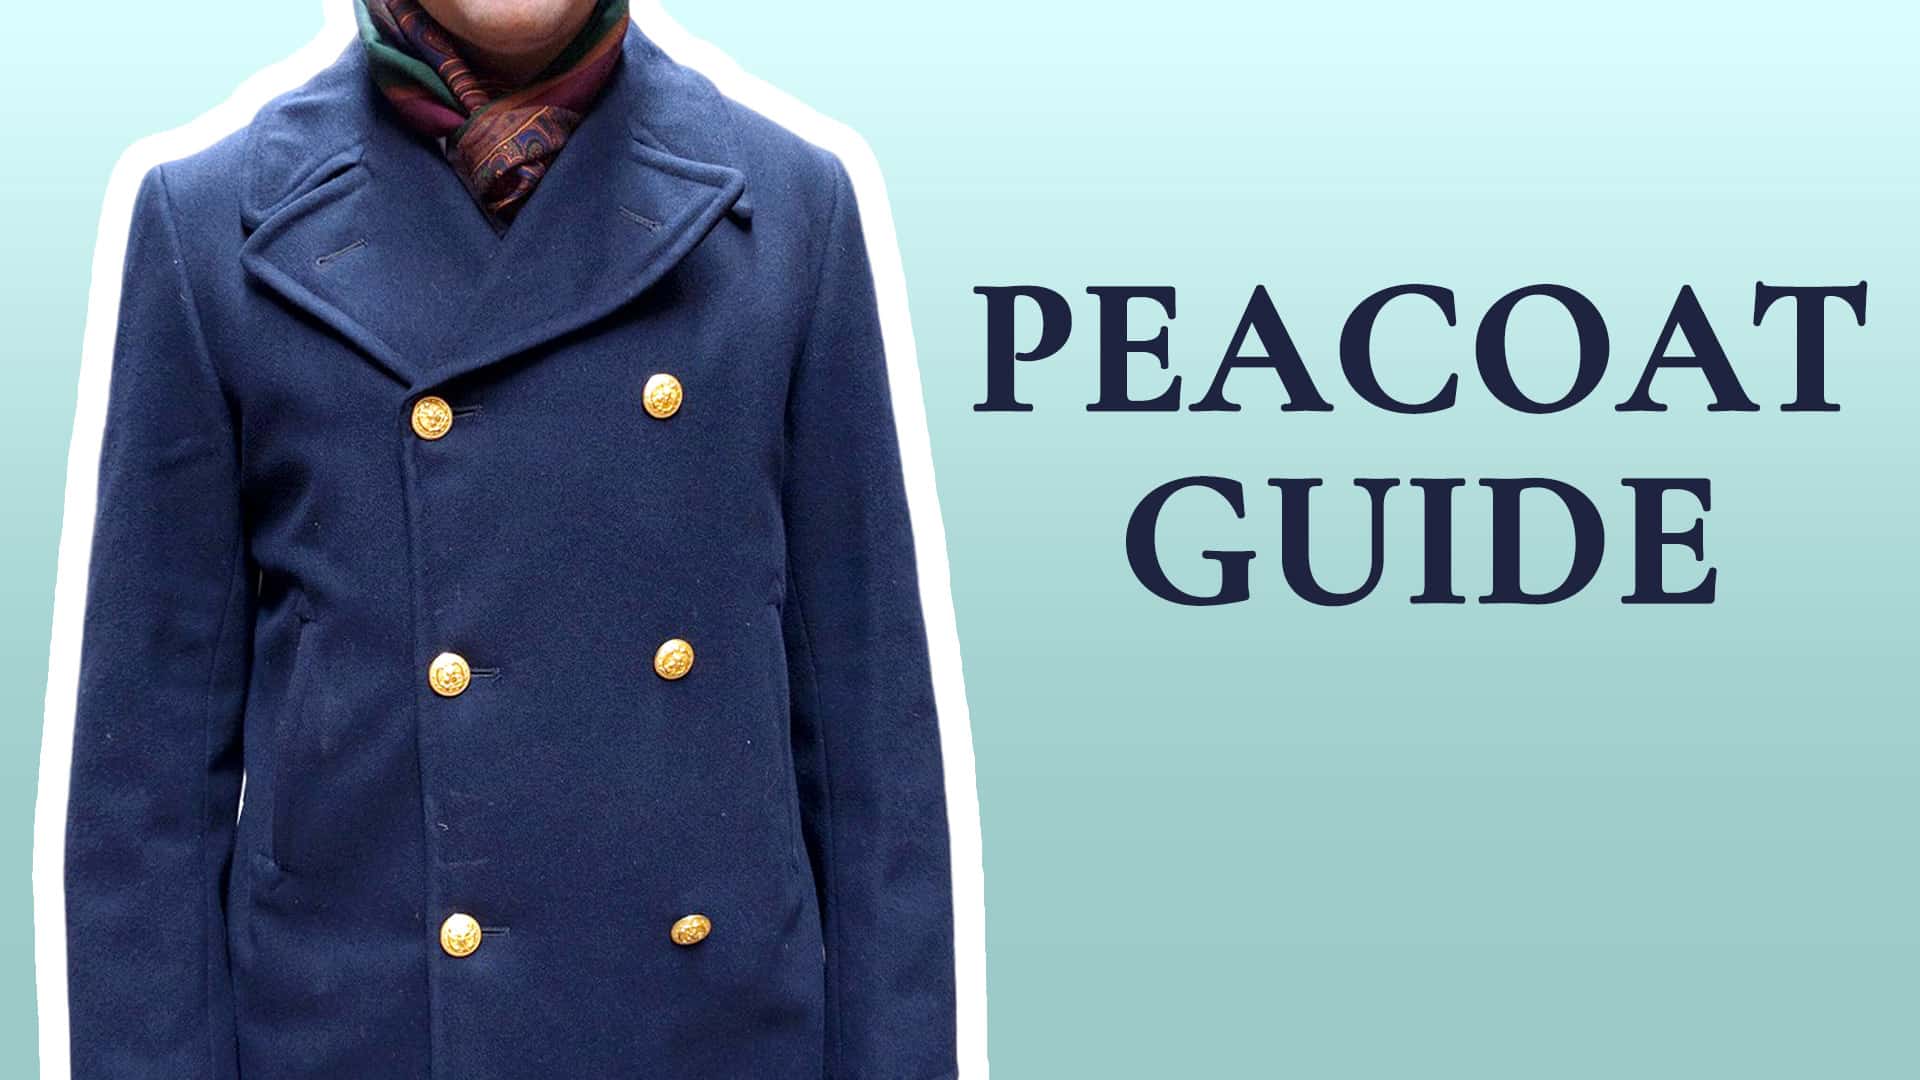 Peacoat Guide - How To Buy & Pea Coat Style Tips